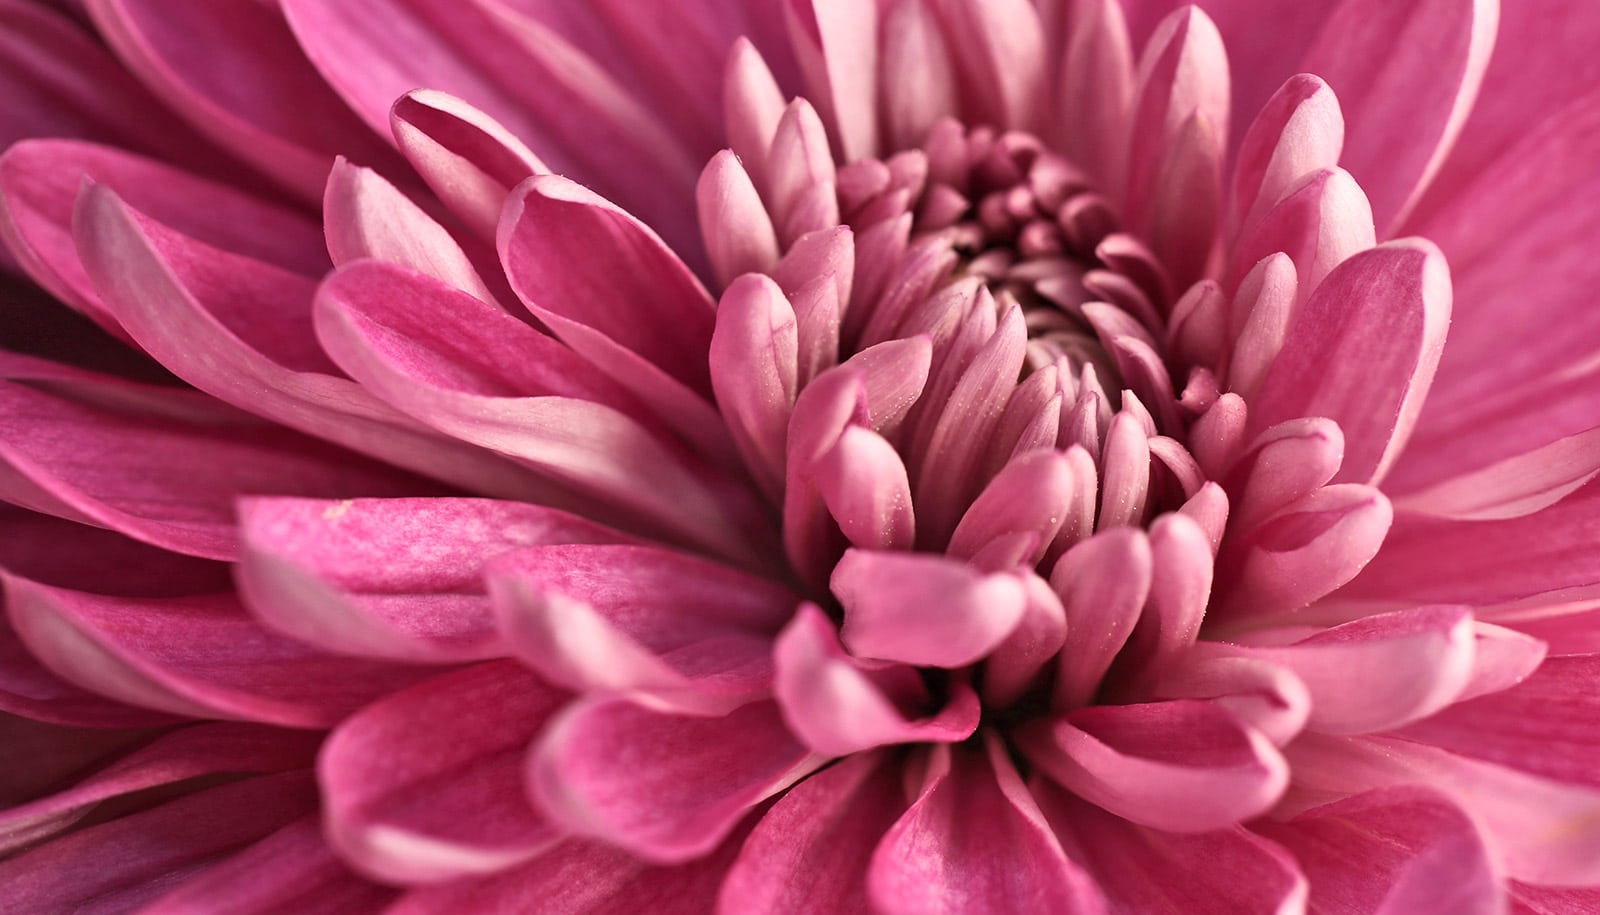 A pink flower shown in close-up.